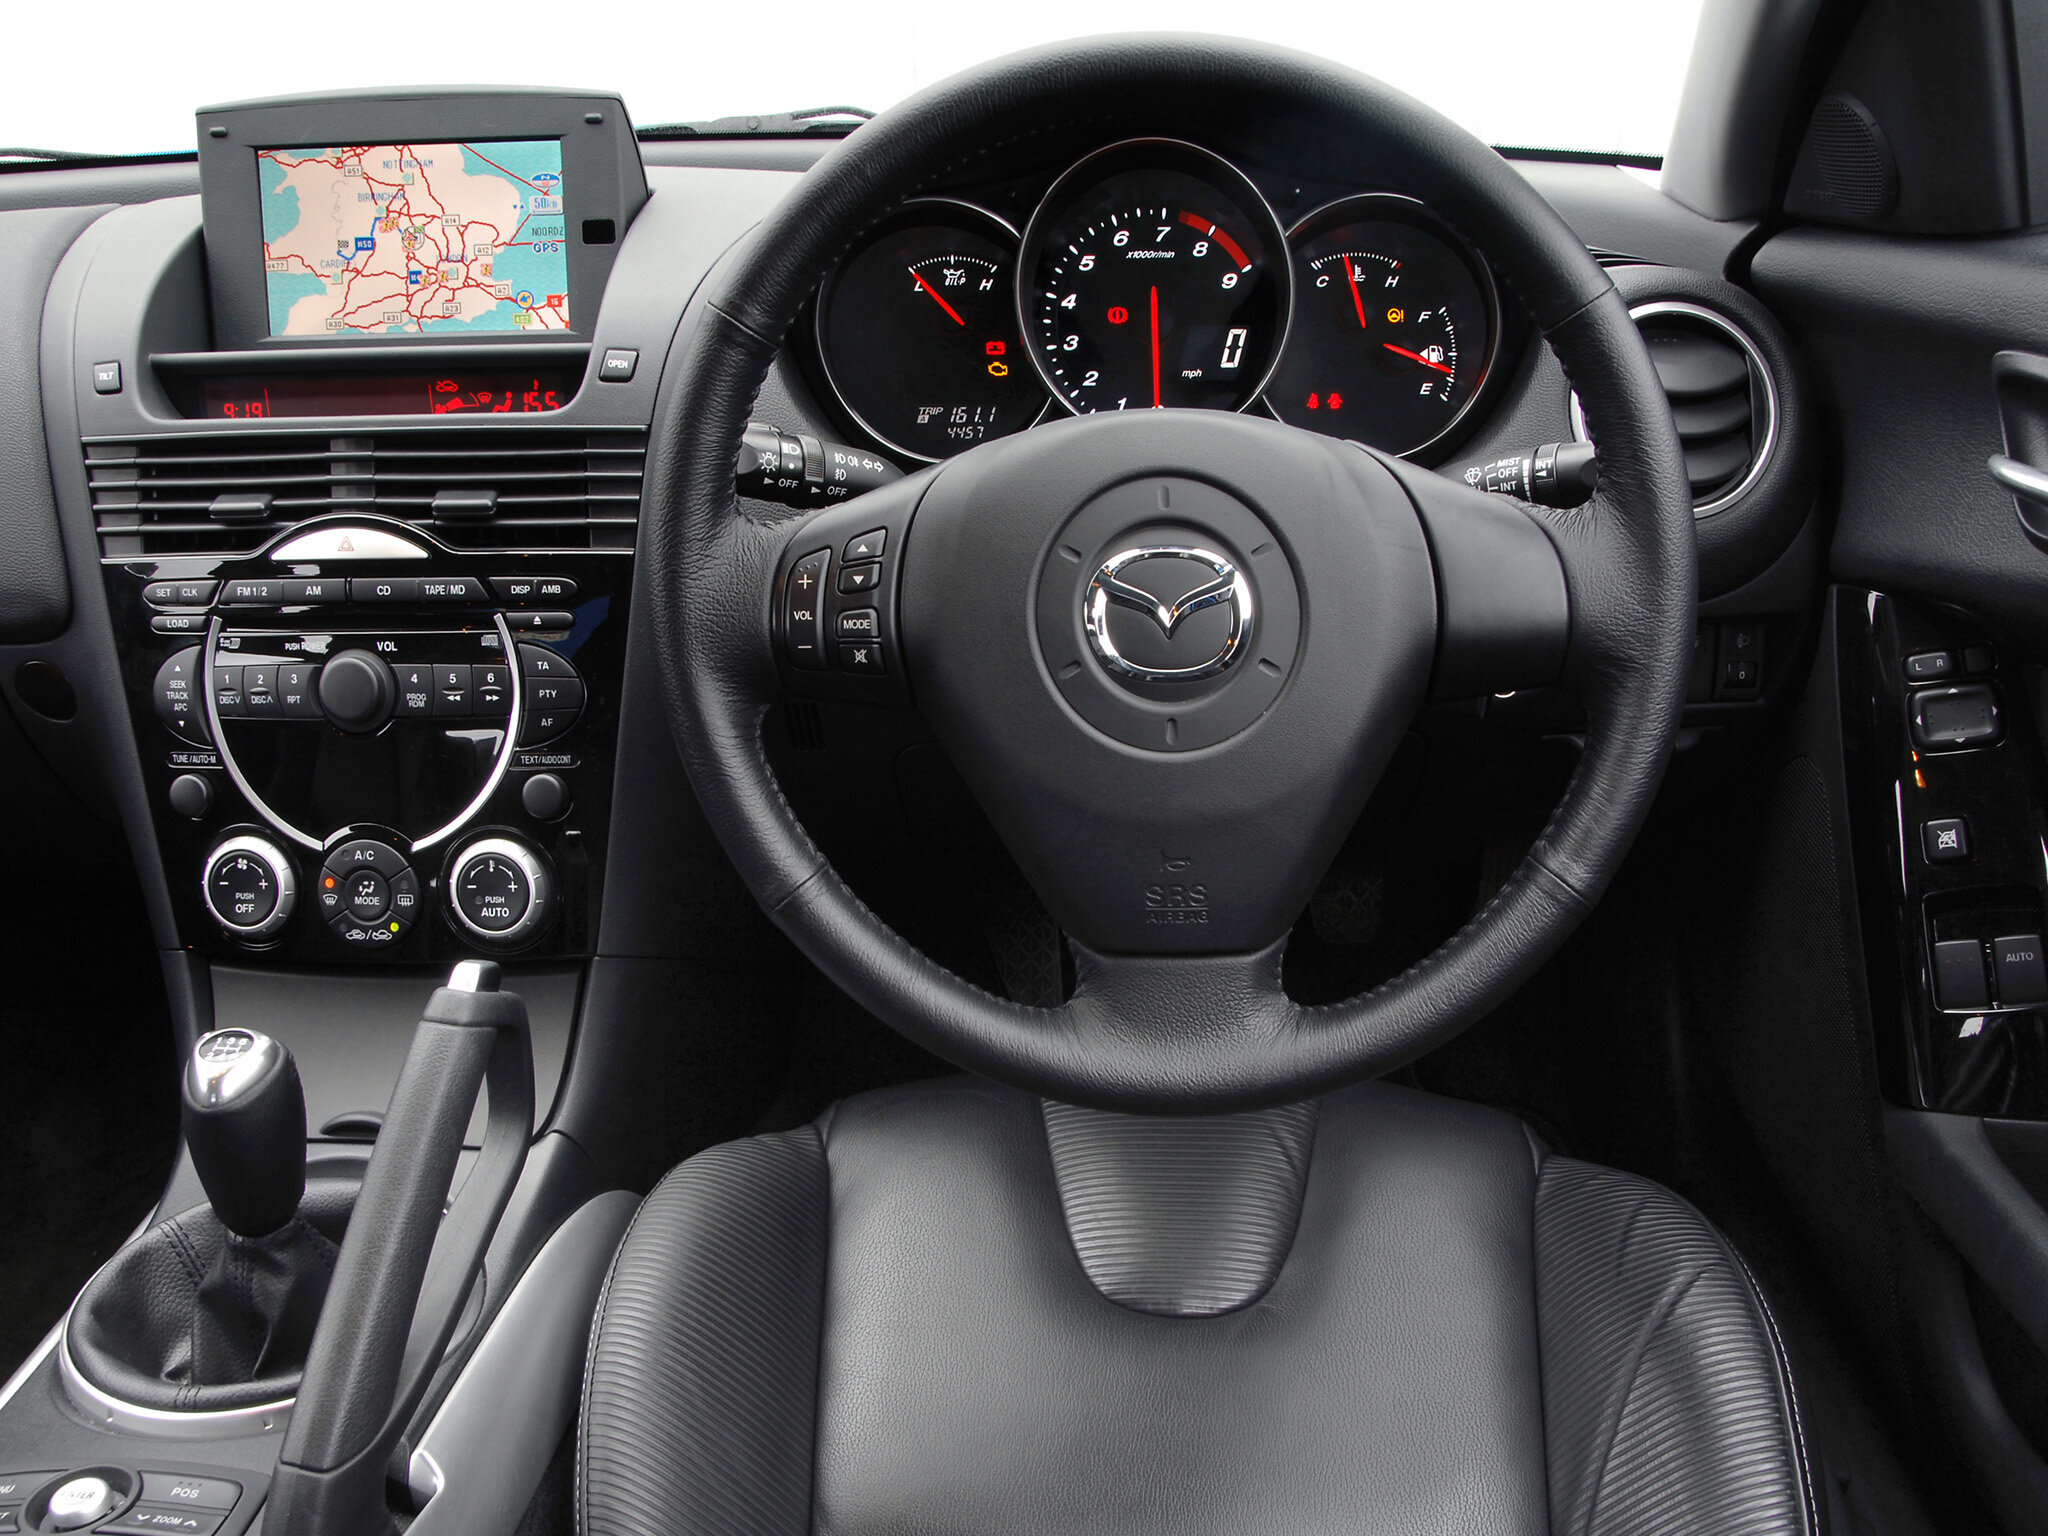 Mazda RX-8 interior is hardly your run-of-the-mill